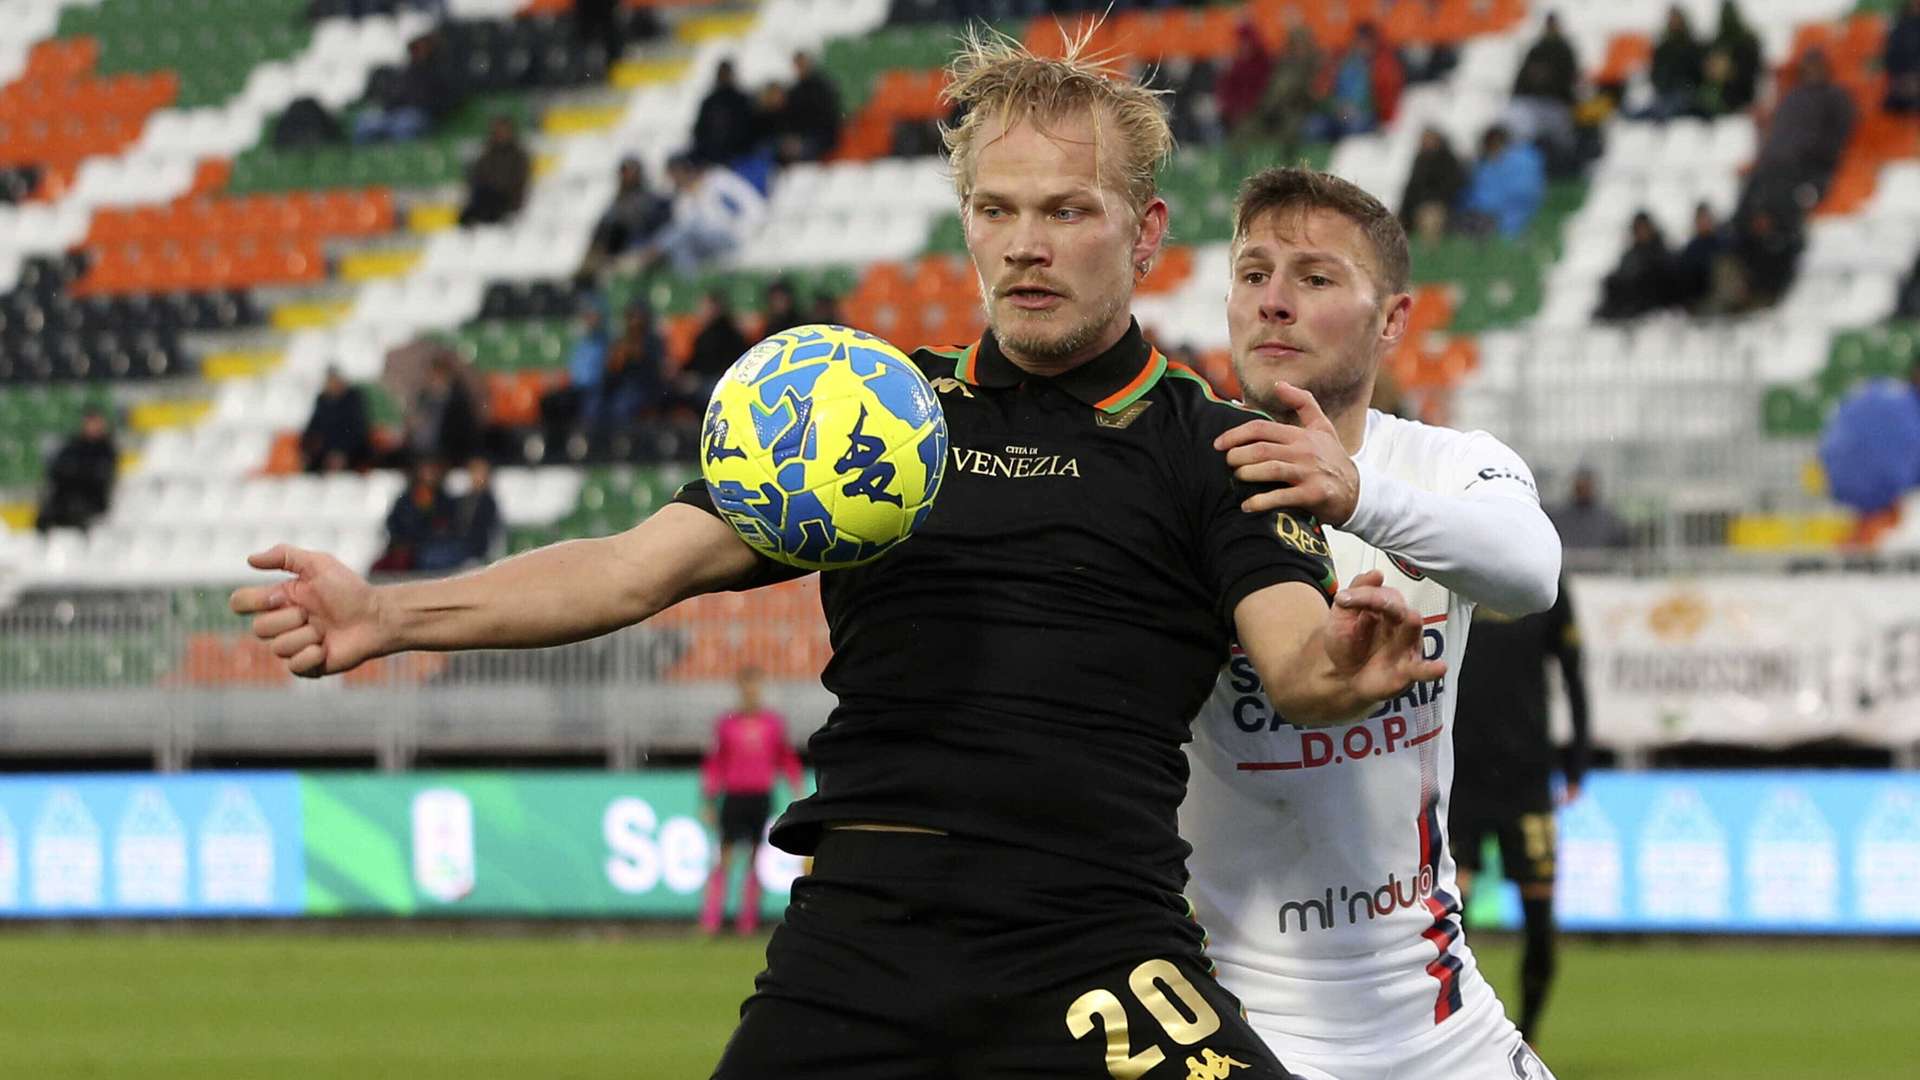 Pohjanpalo has a release clause of €3M, falling within the budget range for frontline reinforcements for Genoa. He has two years left on his contract.